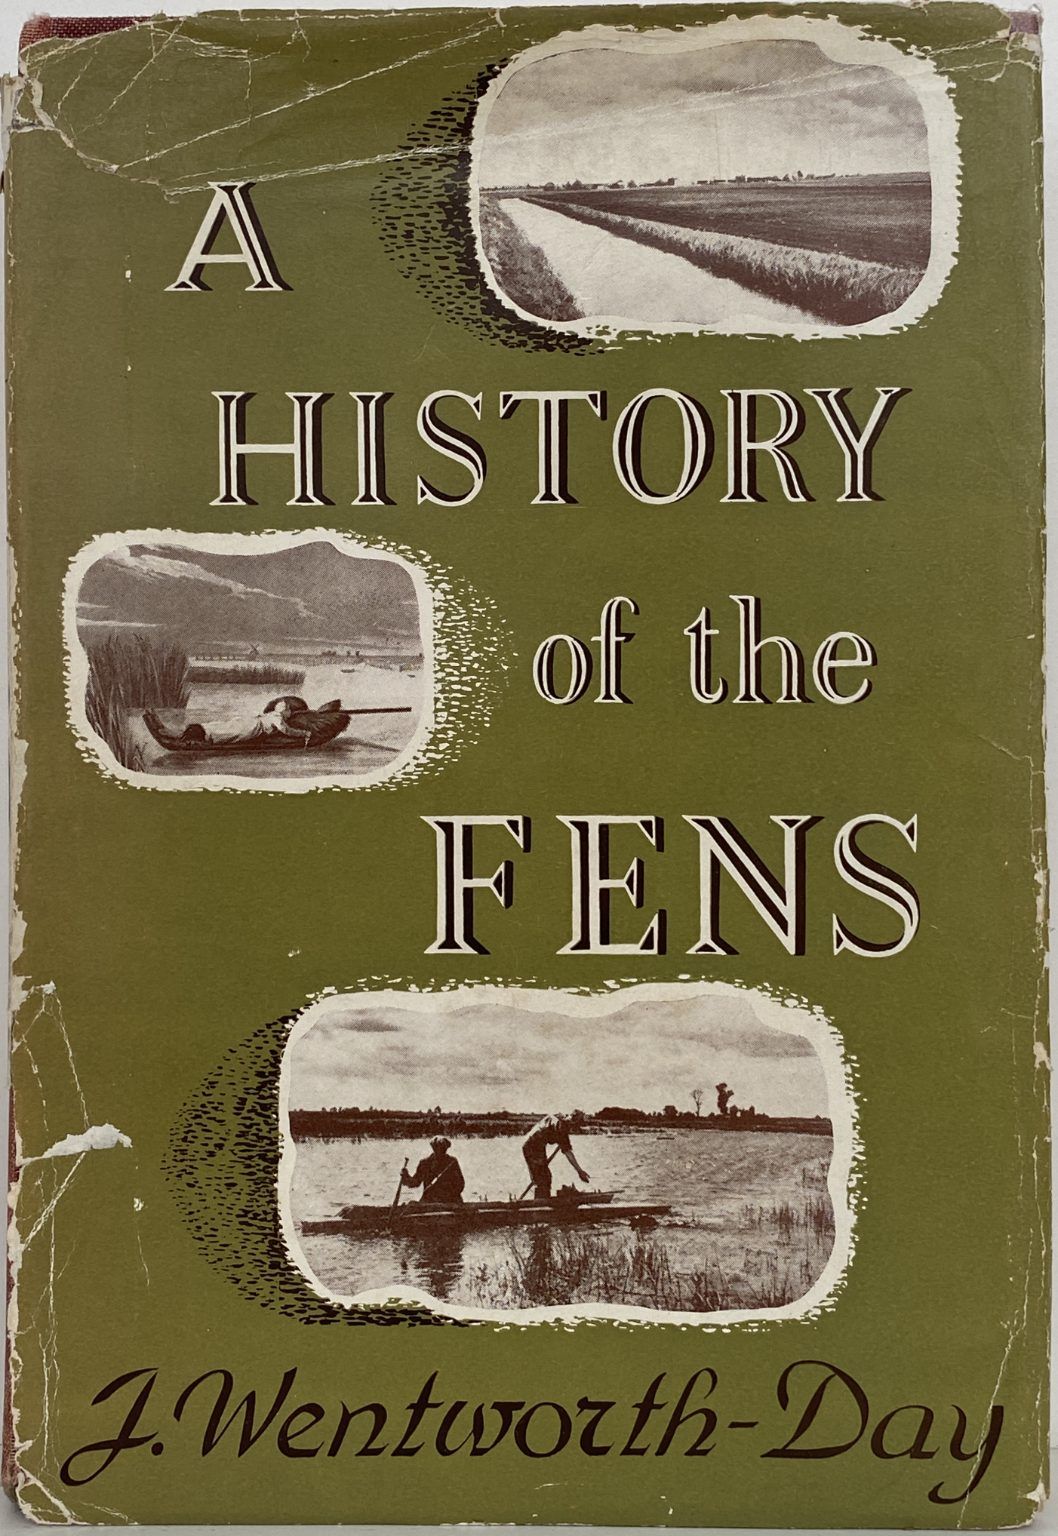 A HISTORY OF THE FENS